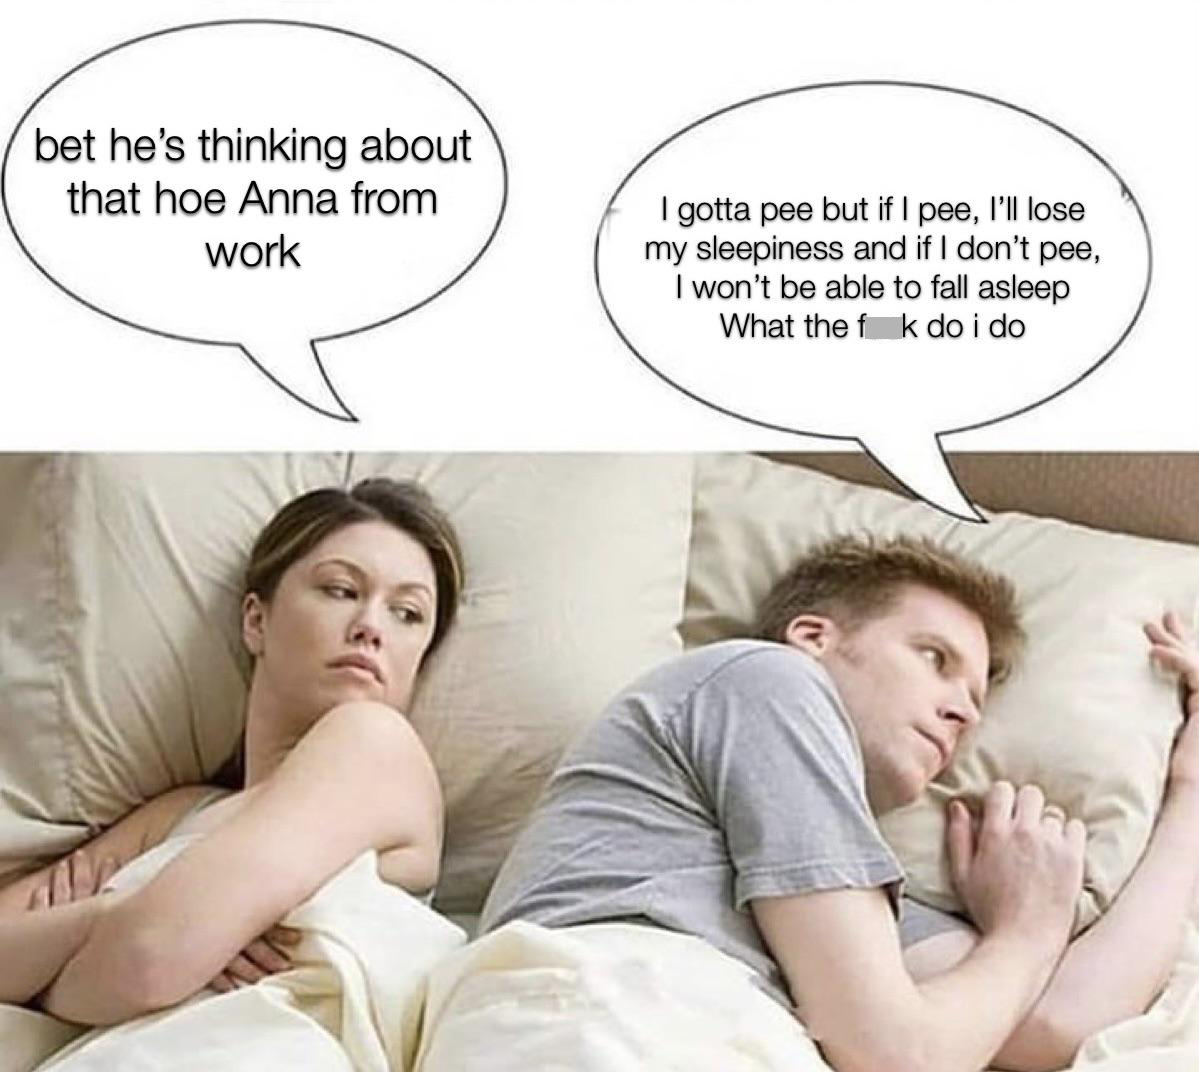 funny memes - dank memes - poly girlfriend memes - bet he's thinking about that hoe Anna from work I gotta pee but if I pee, I'll lose my sleepiness and if I don't pee, I won't be able to fall asleep What the f k do i do